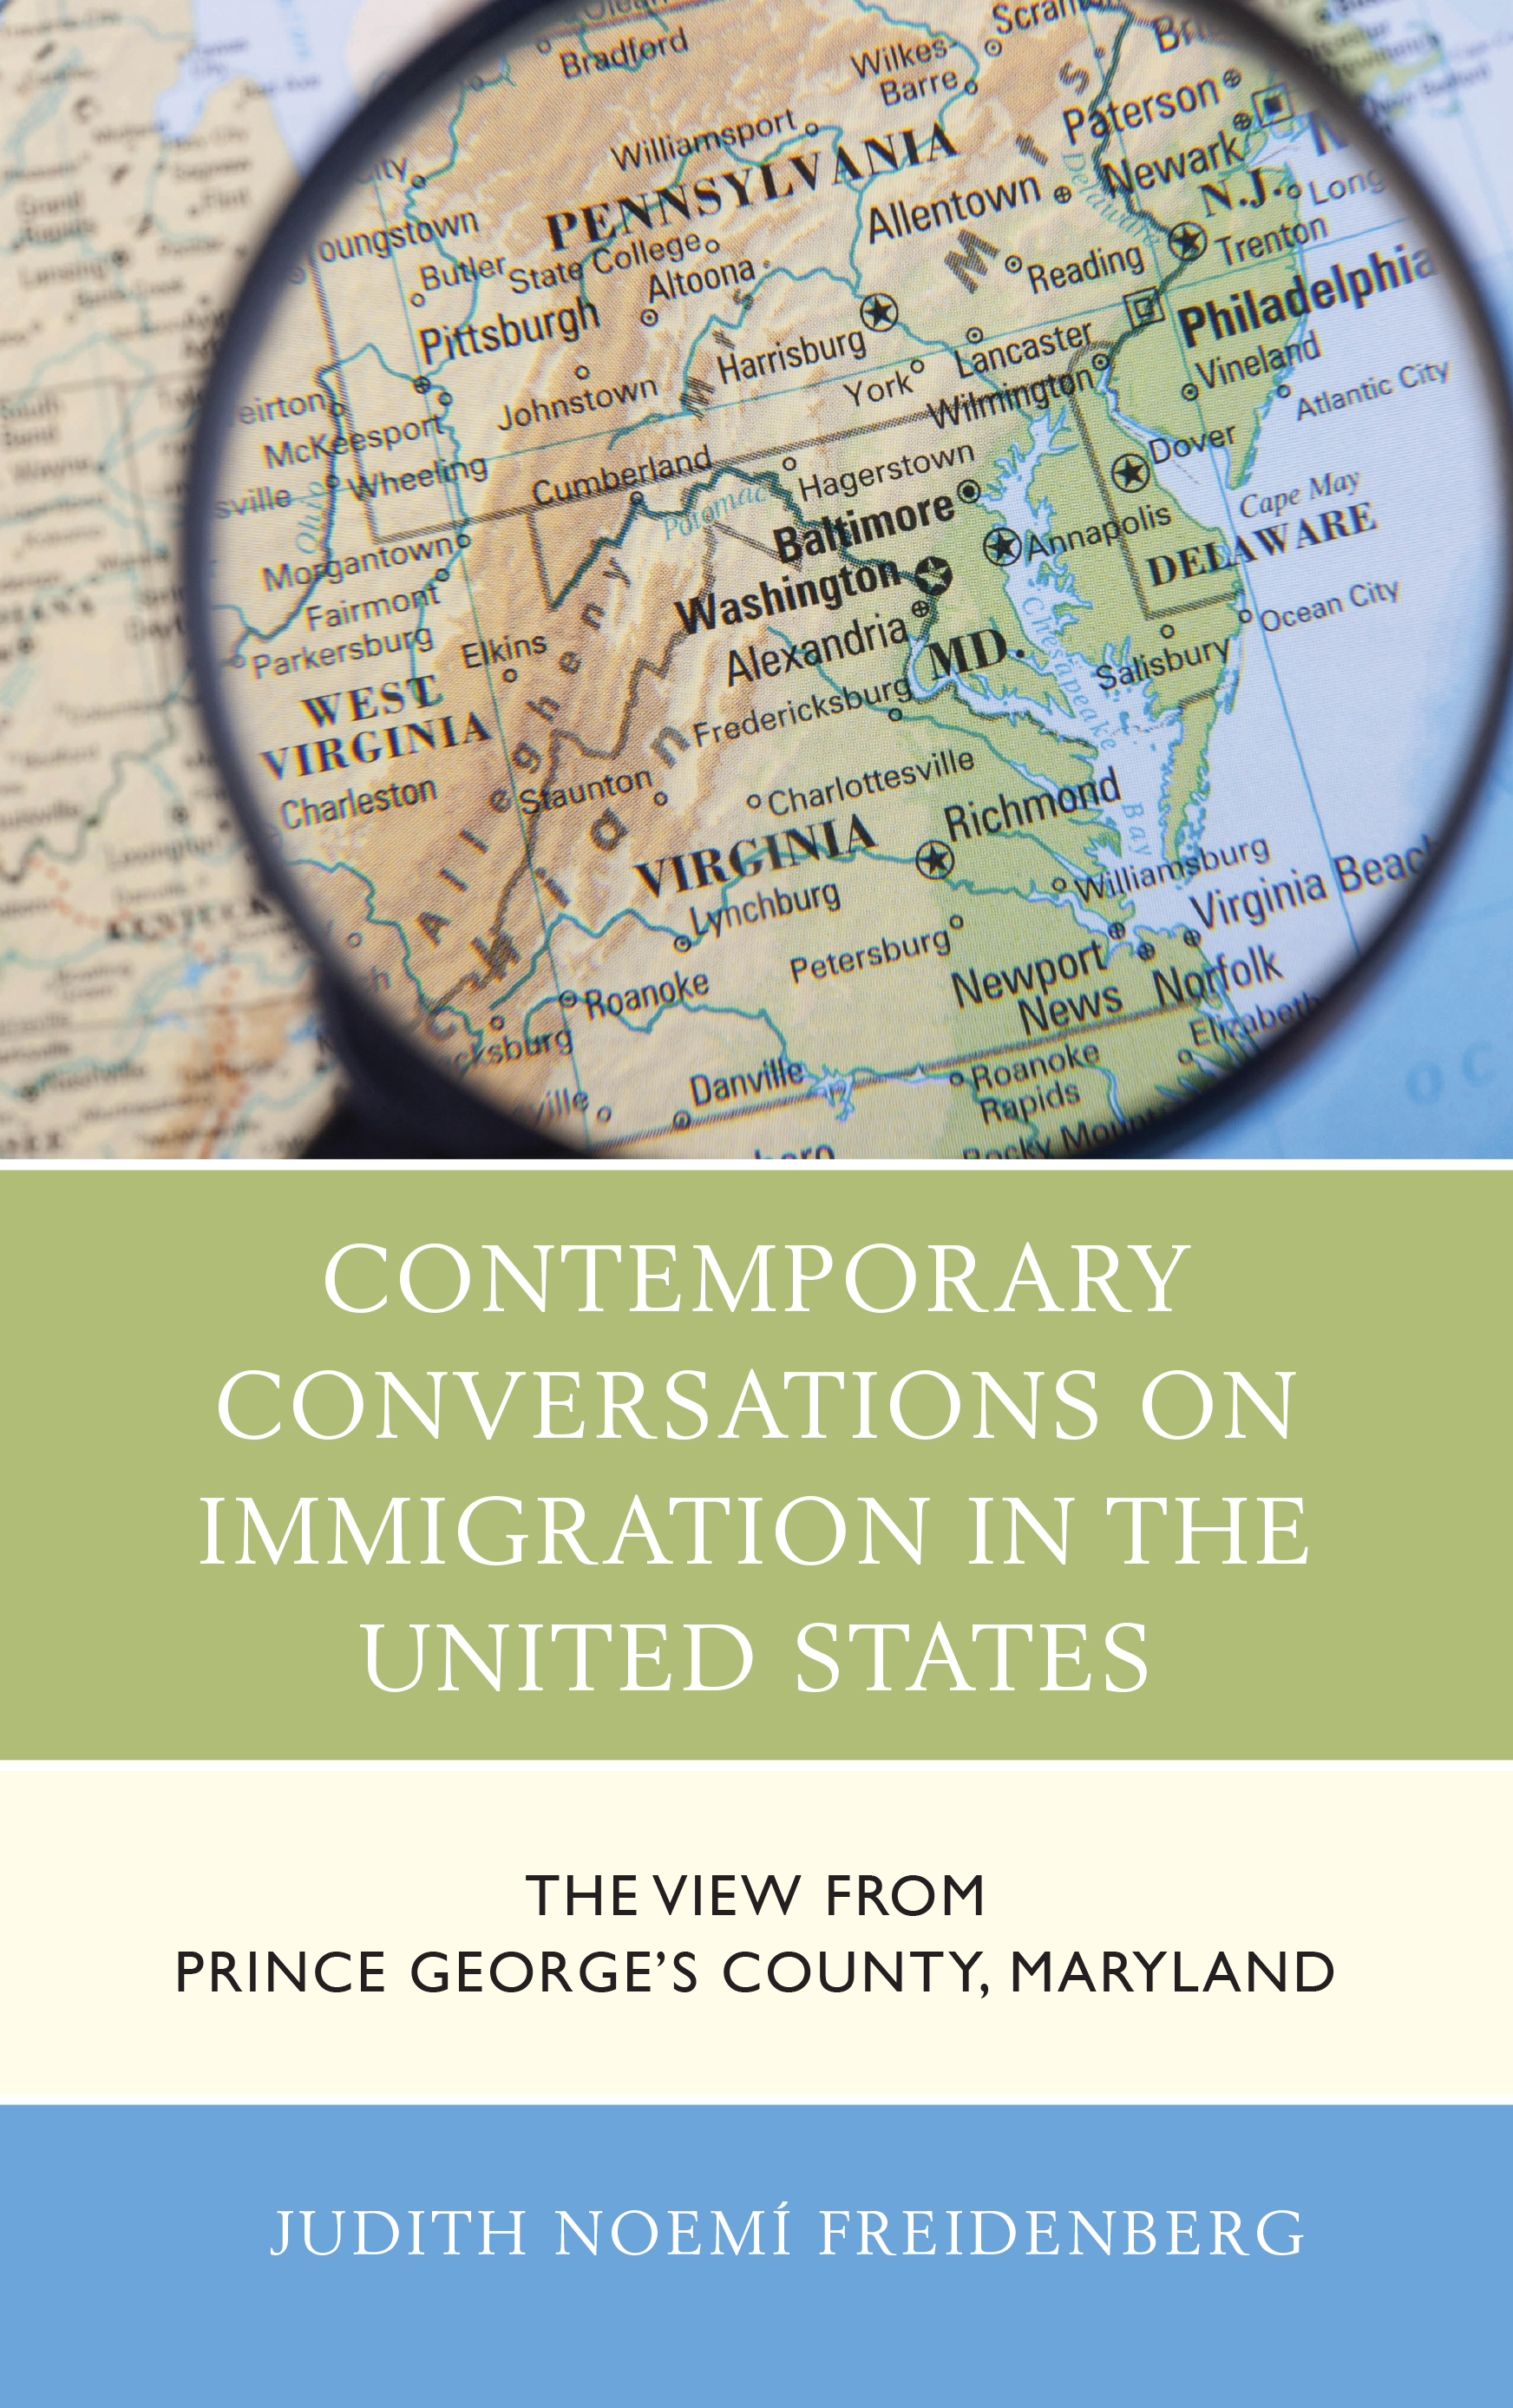 Contemporary Conversations on Immigration in the United States: The View from Prince George's County, Maryland